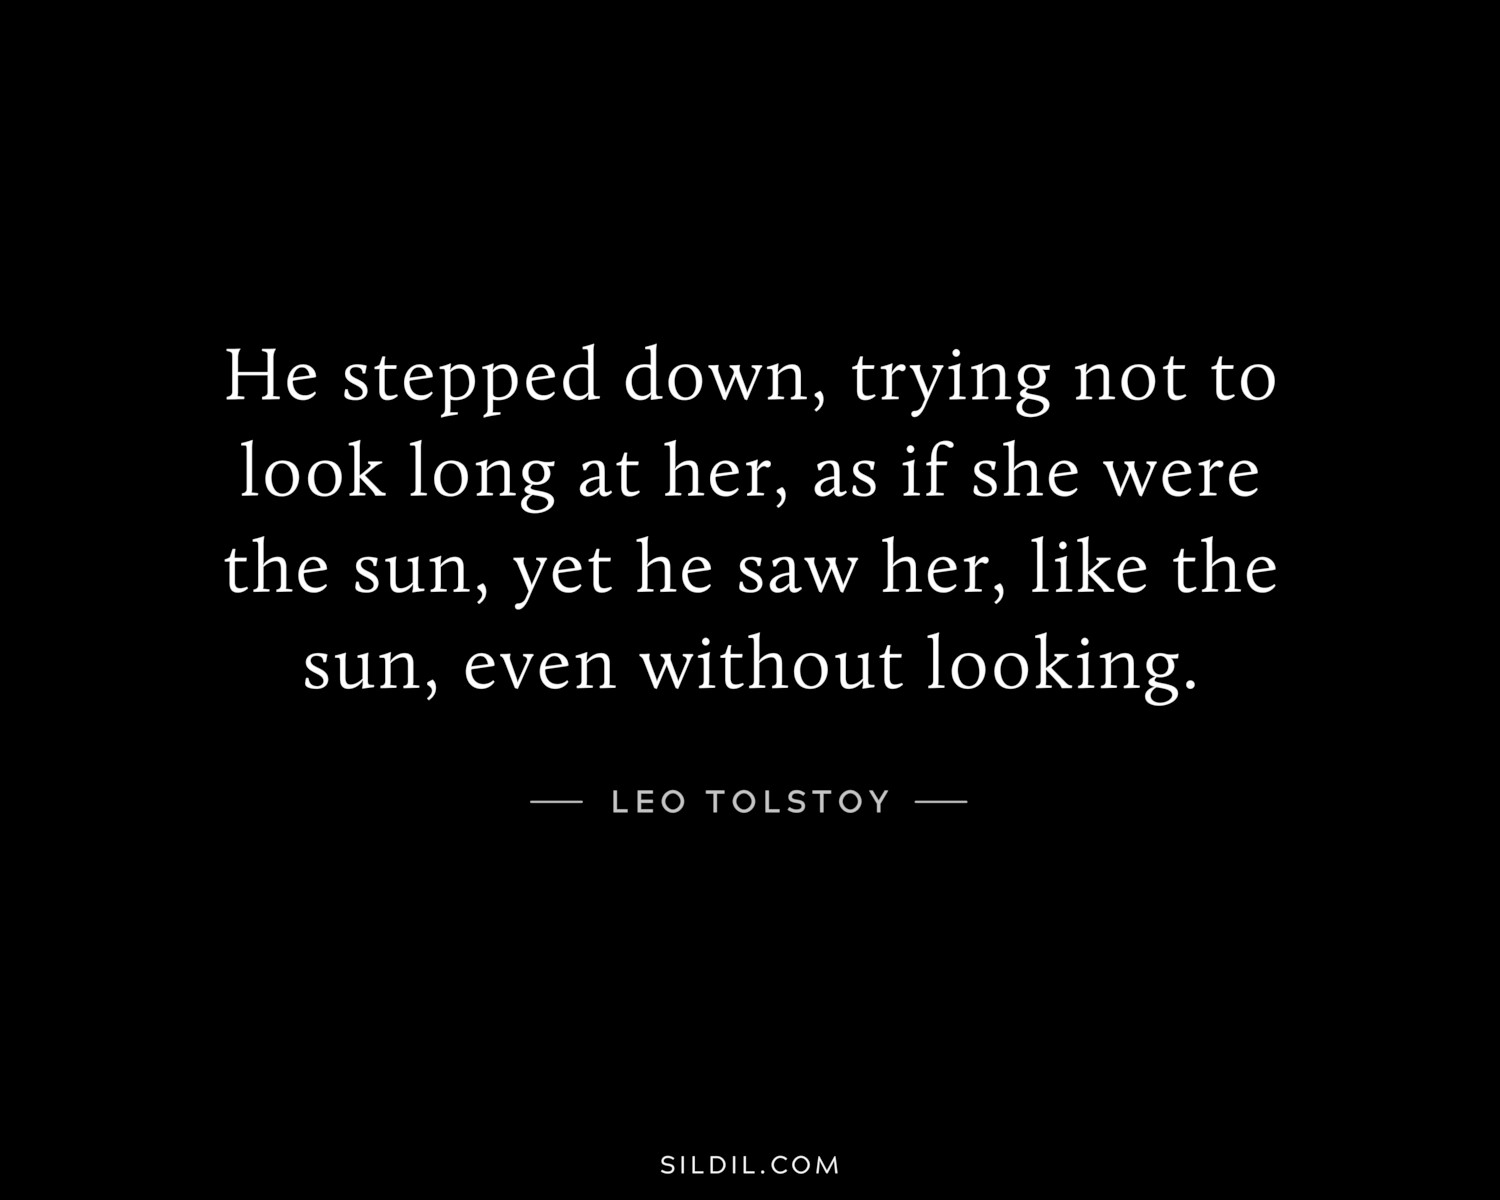 He stepped down, trying not to look long at her, as if she were the sun, yet he saw her, like the sun, even without looking.